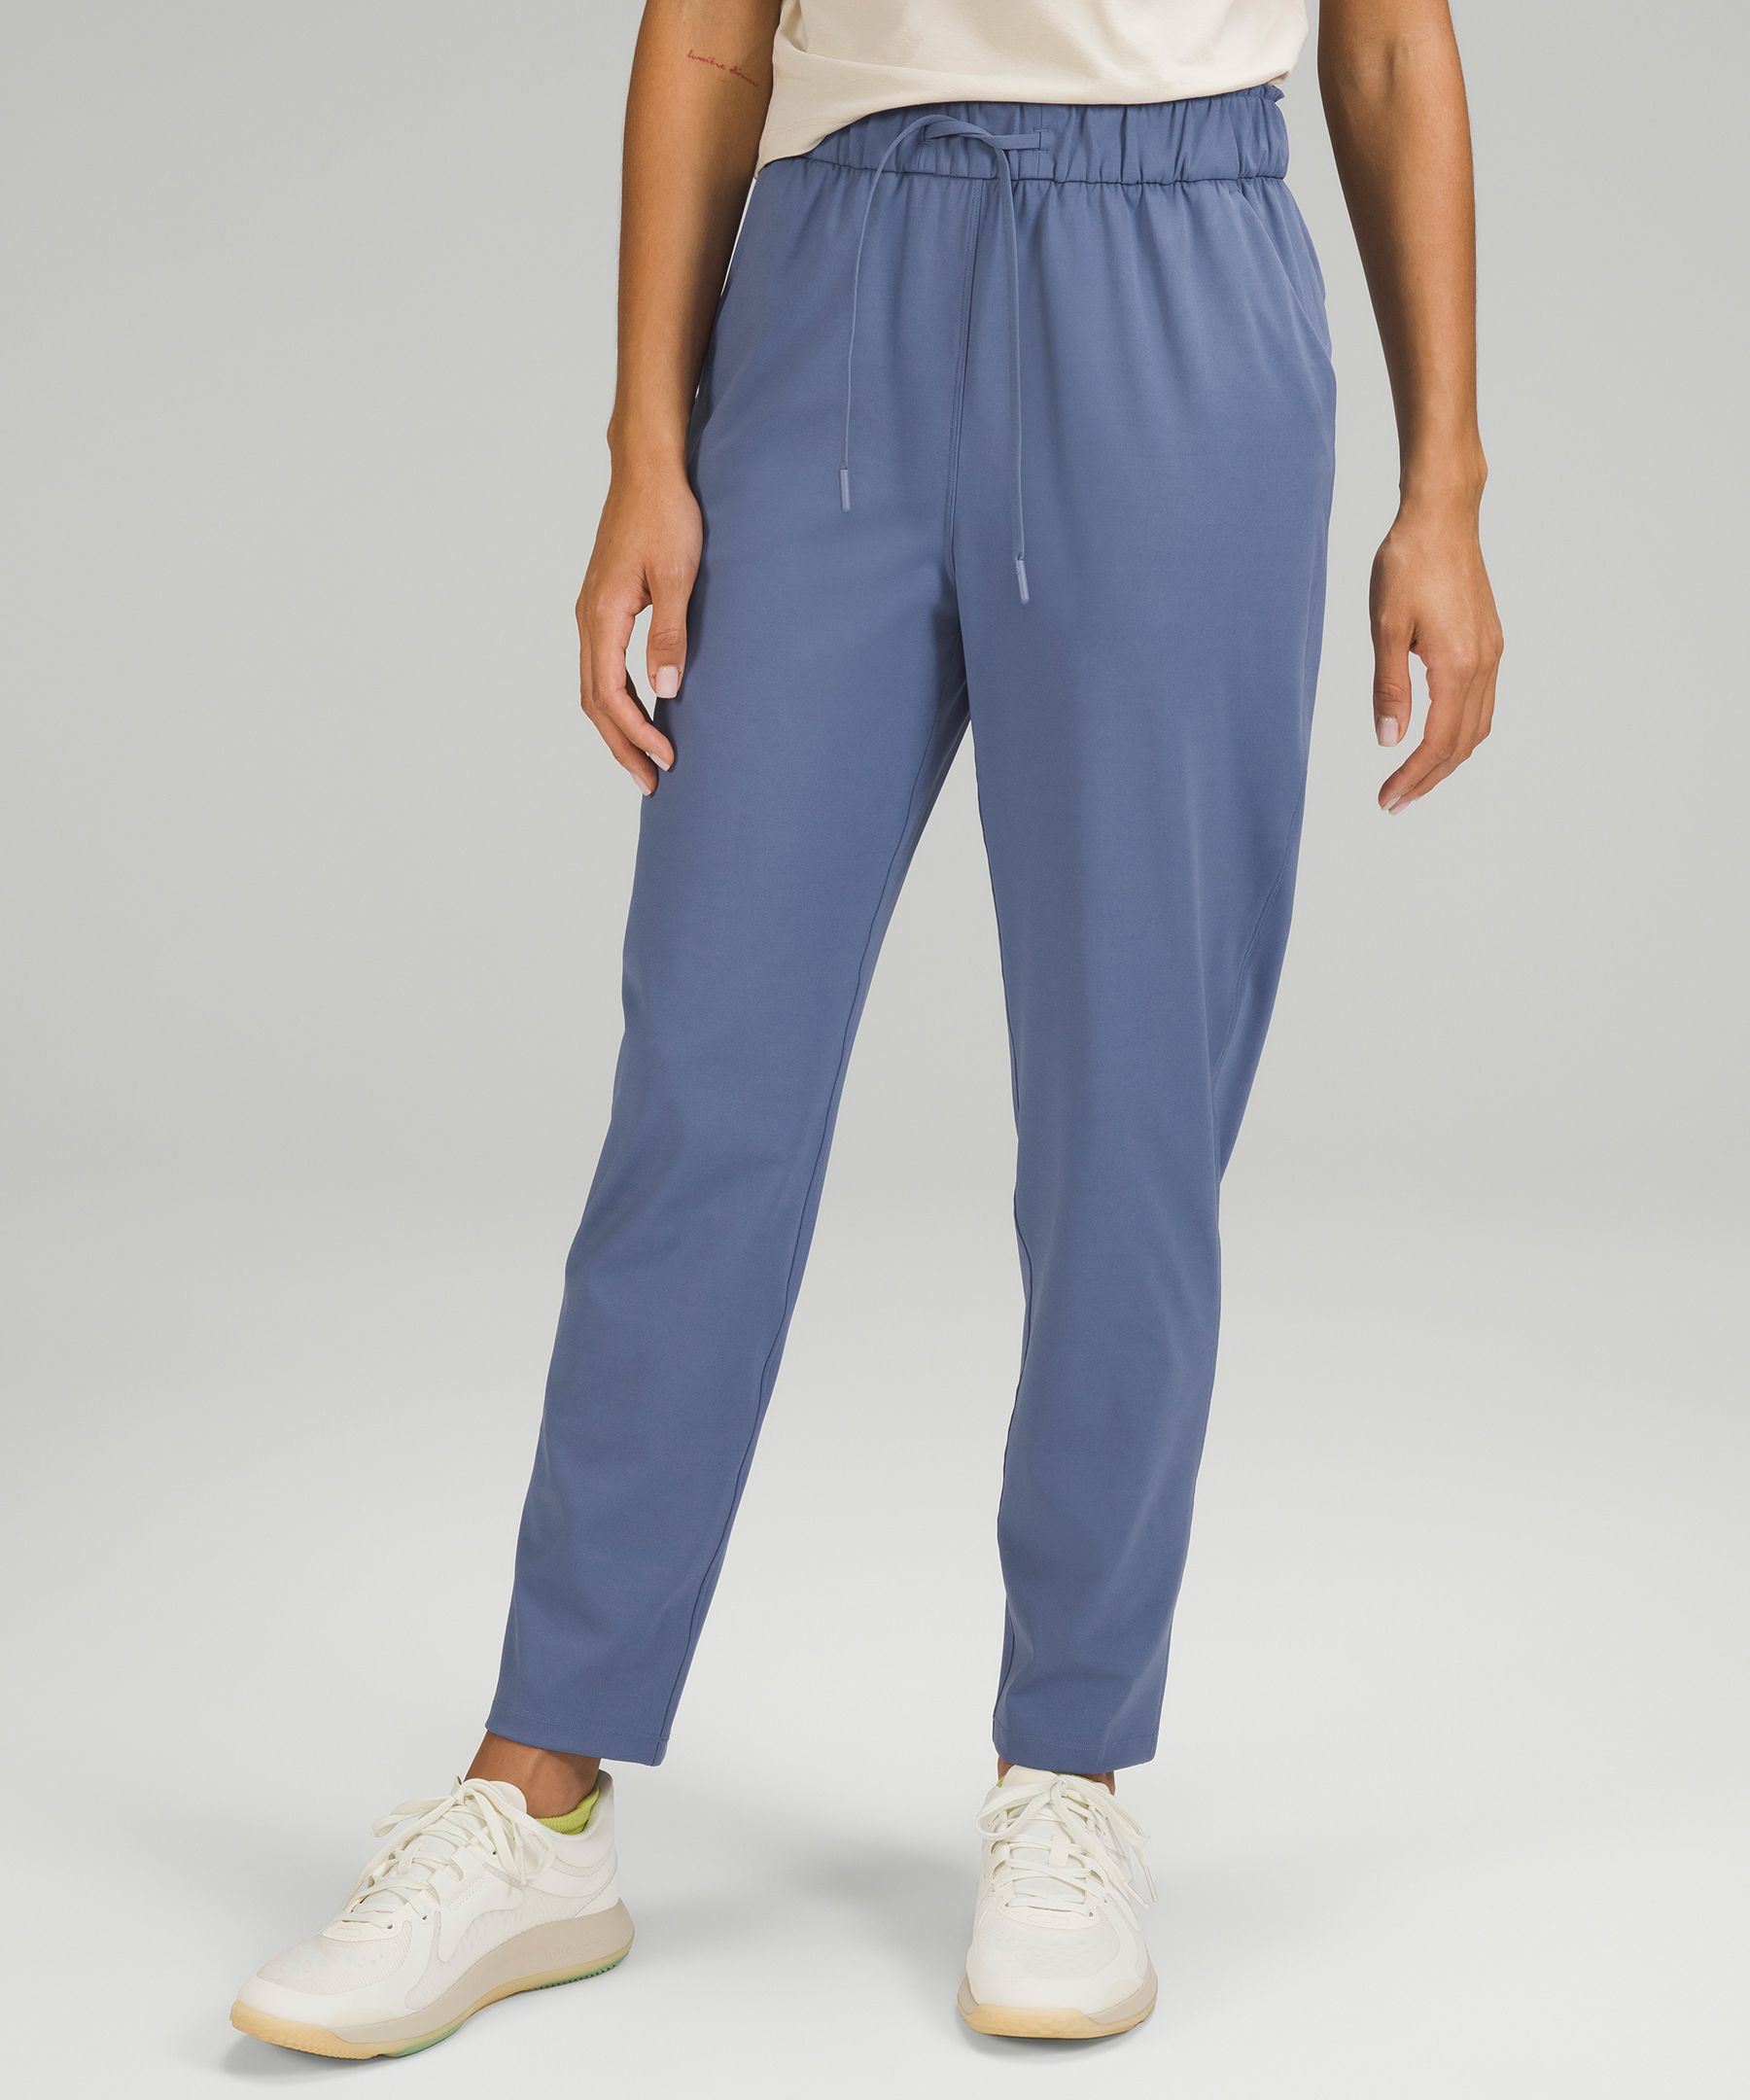 Lululemon athletica Stretch High-Rise Pant 7/8 Length, Women's Trousers